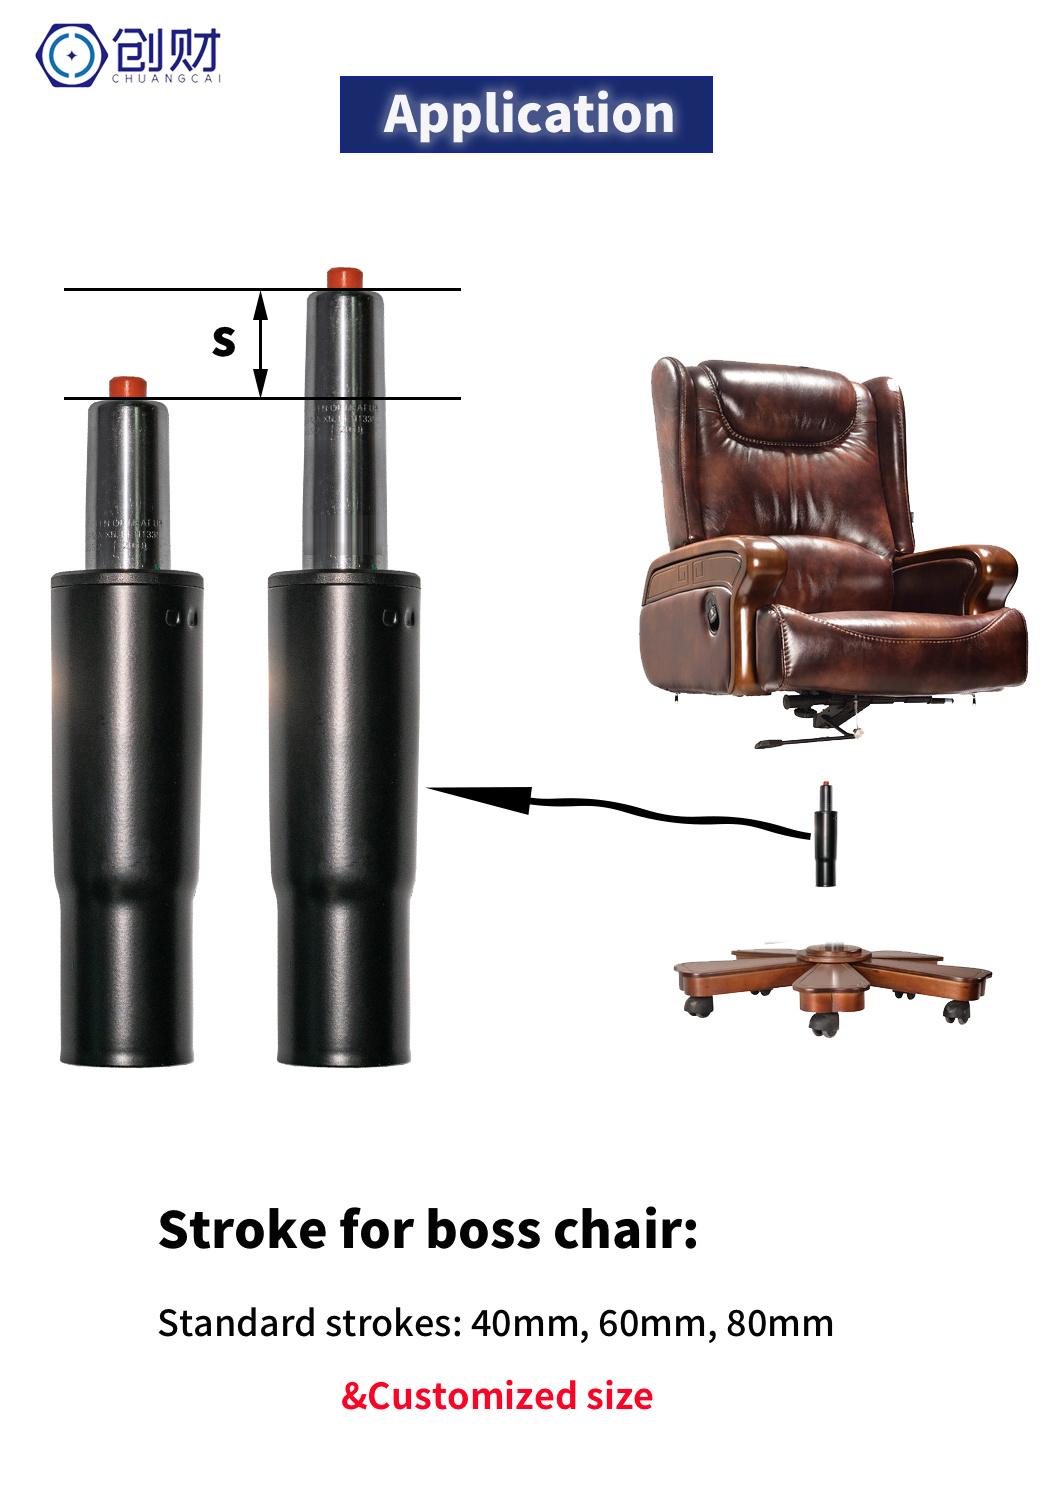 Height-Adjustable Office Chair Parts